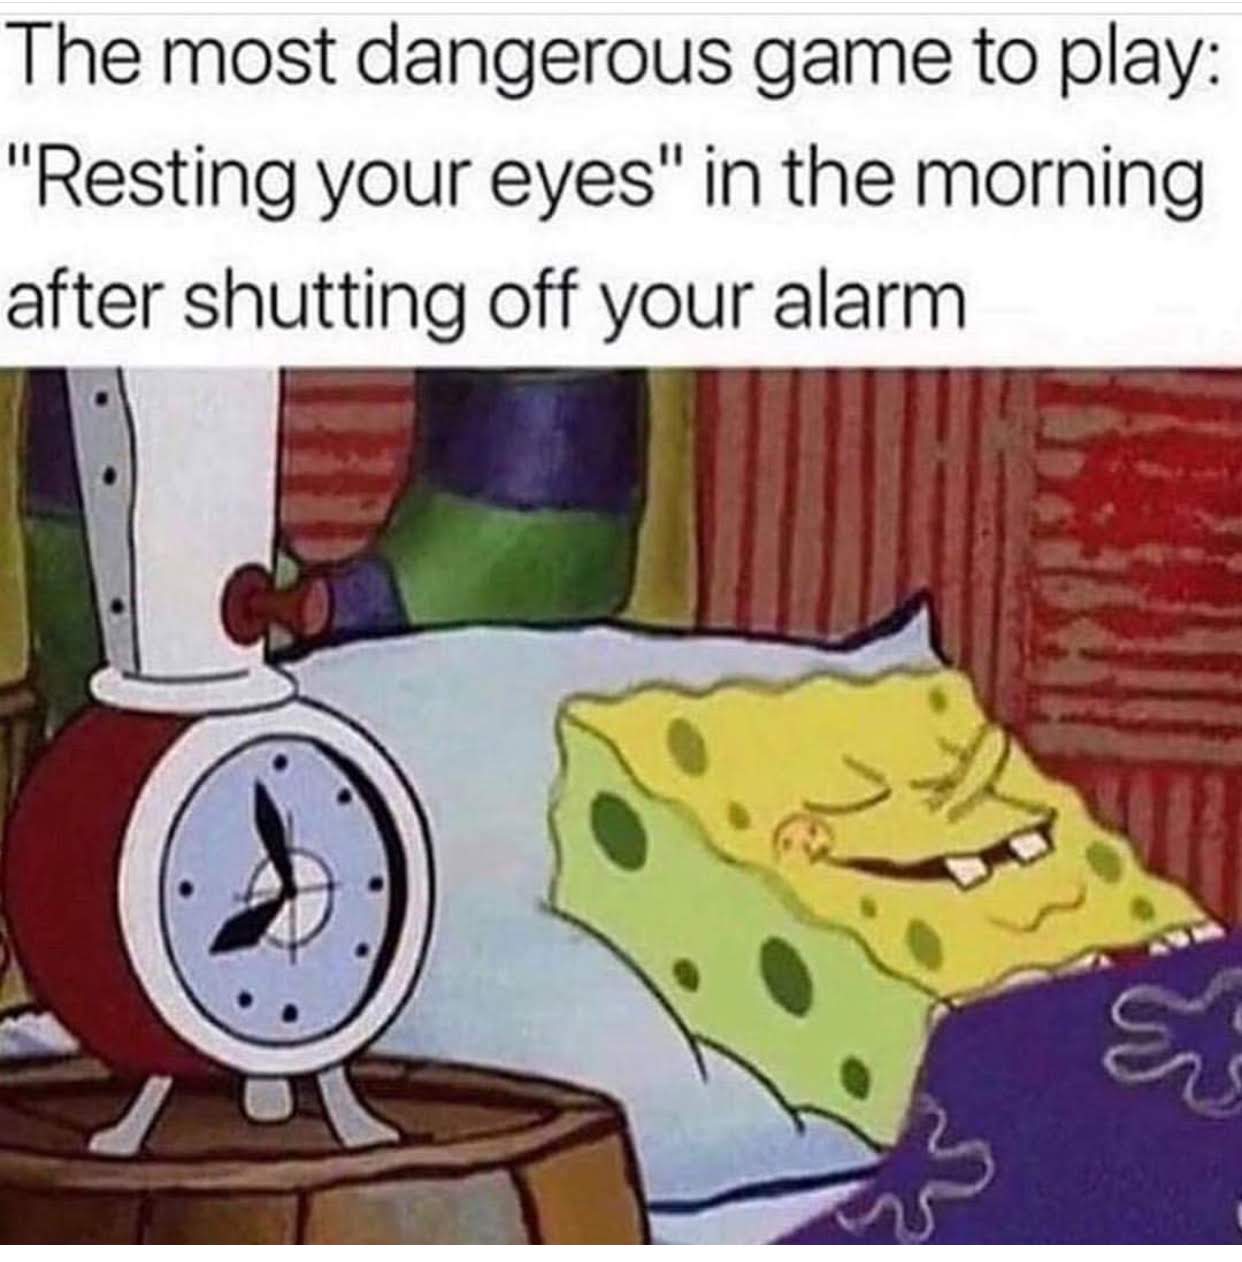 memes - most dangerous game meme - The most dangerous game to play "Resting your eyes" in the morning after shutting off your alarm